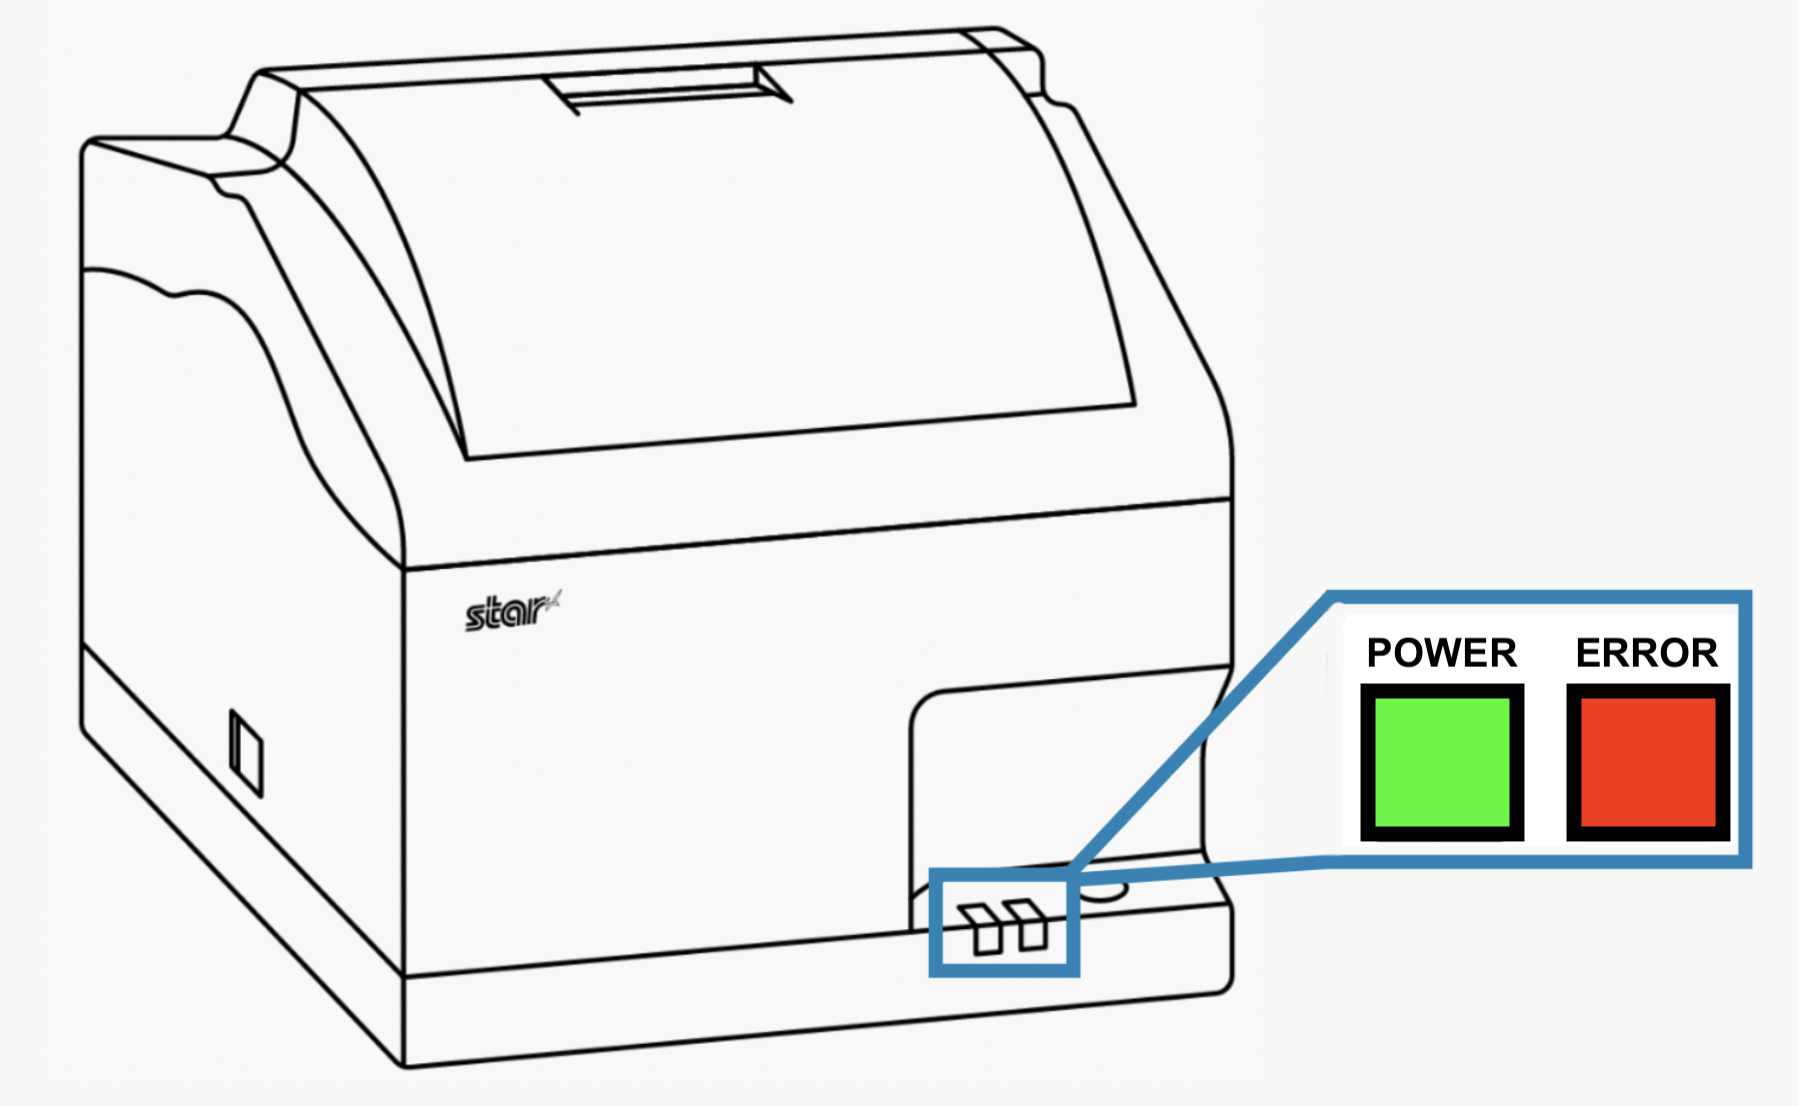 Printer indicating green power light and red error lights.